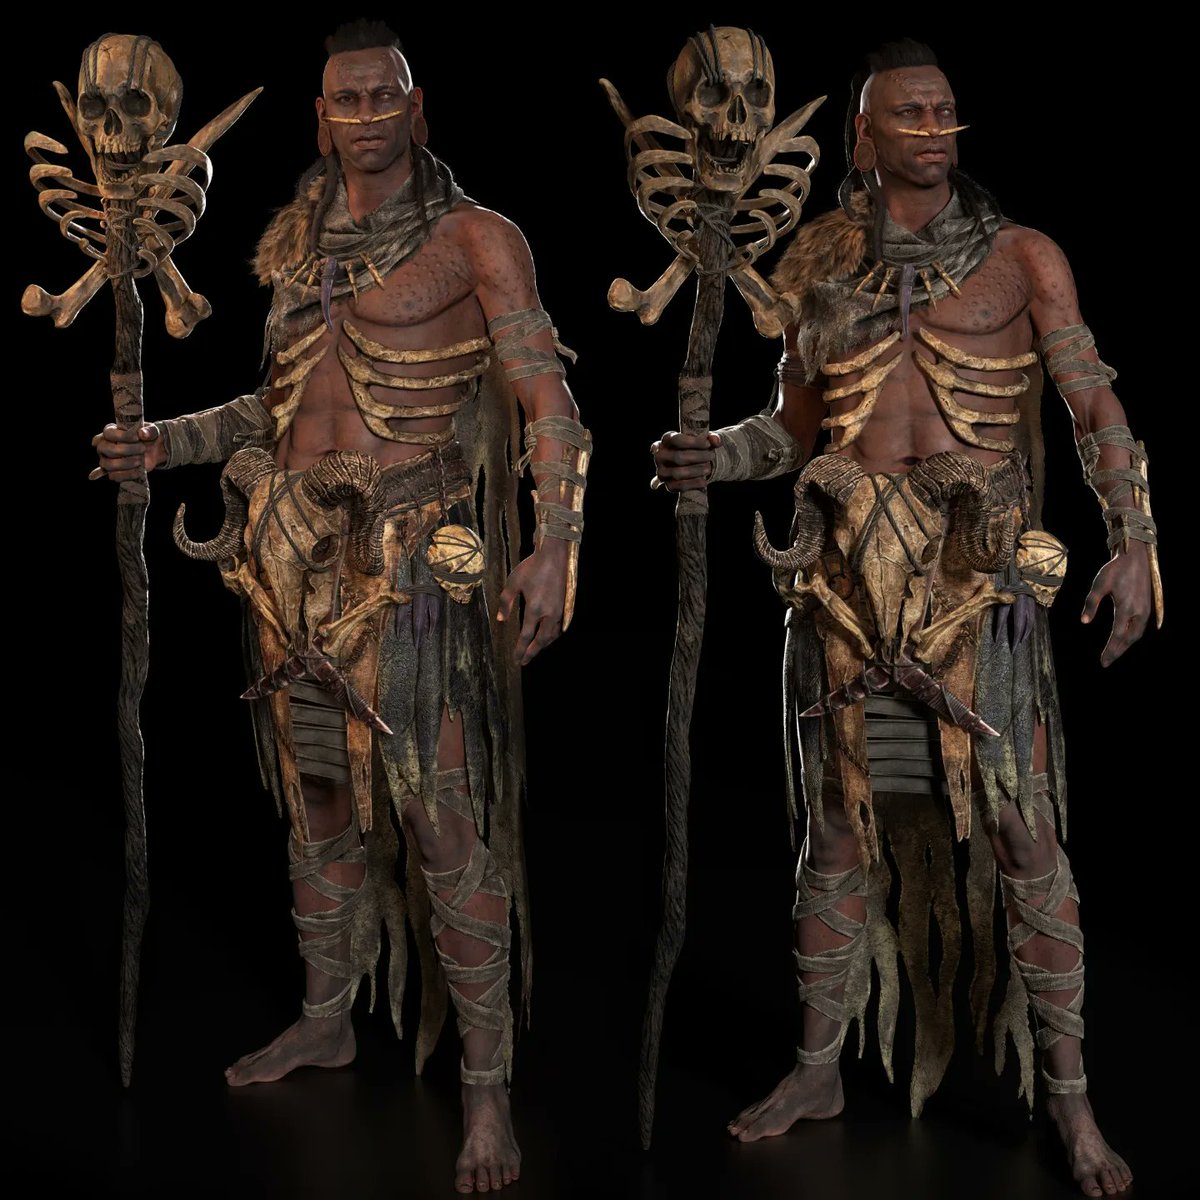 Sup everyone!!!

 I am very happy to present my first realtime character for games that I have been working on during the course at @igorcatto as a tutoror.

I hope you like it, see you soon.

 #shaman #mursitribe #africancharacter #3d  #3dcharacterdesign #marmosettoolbag #zbrush